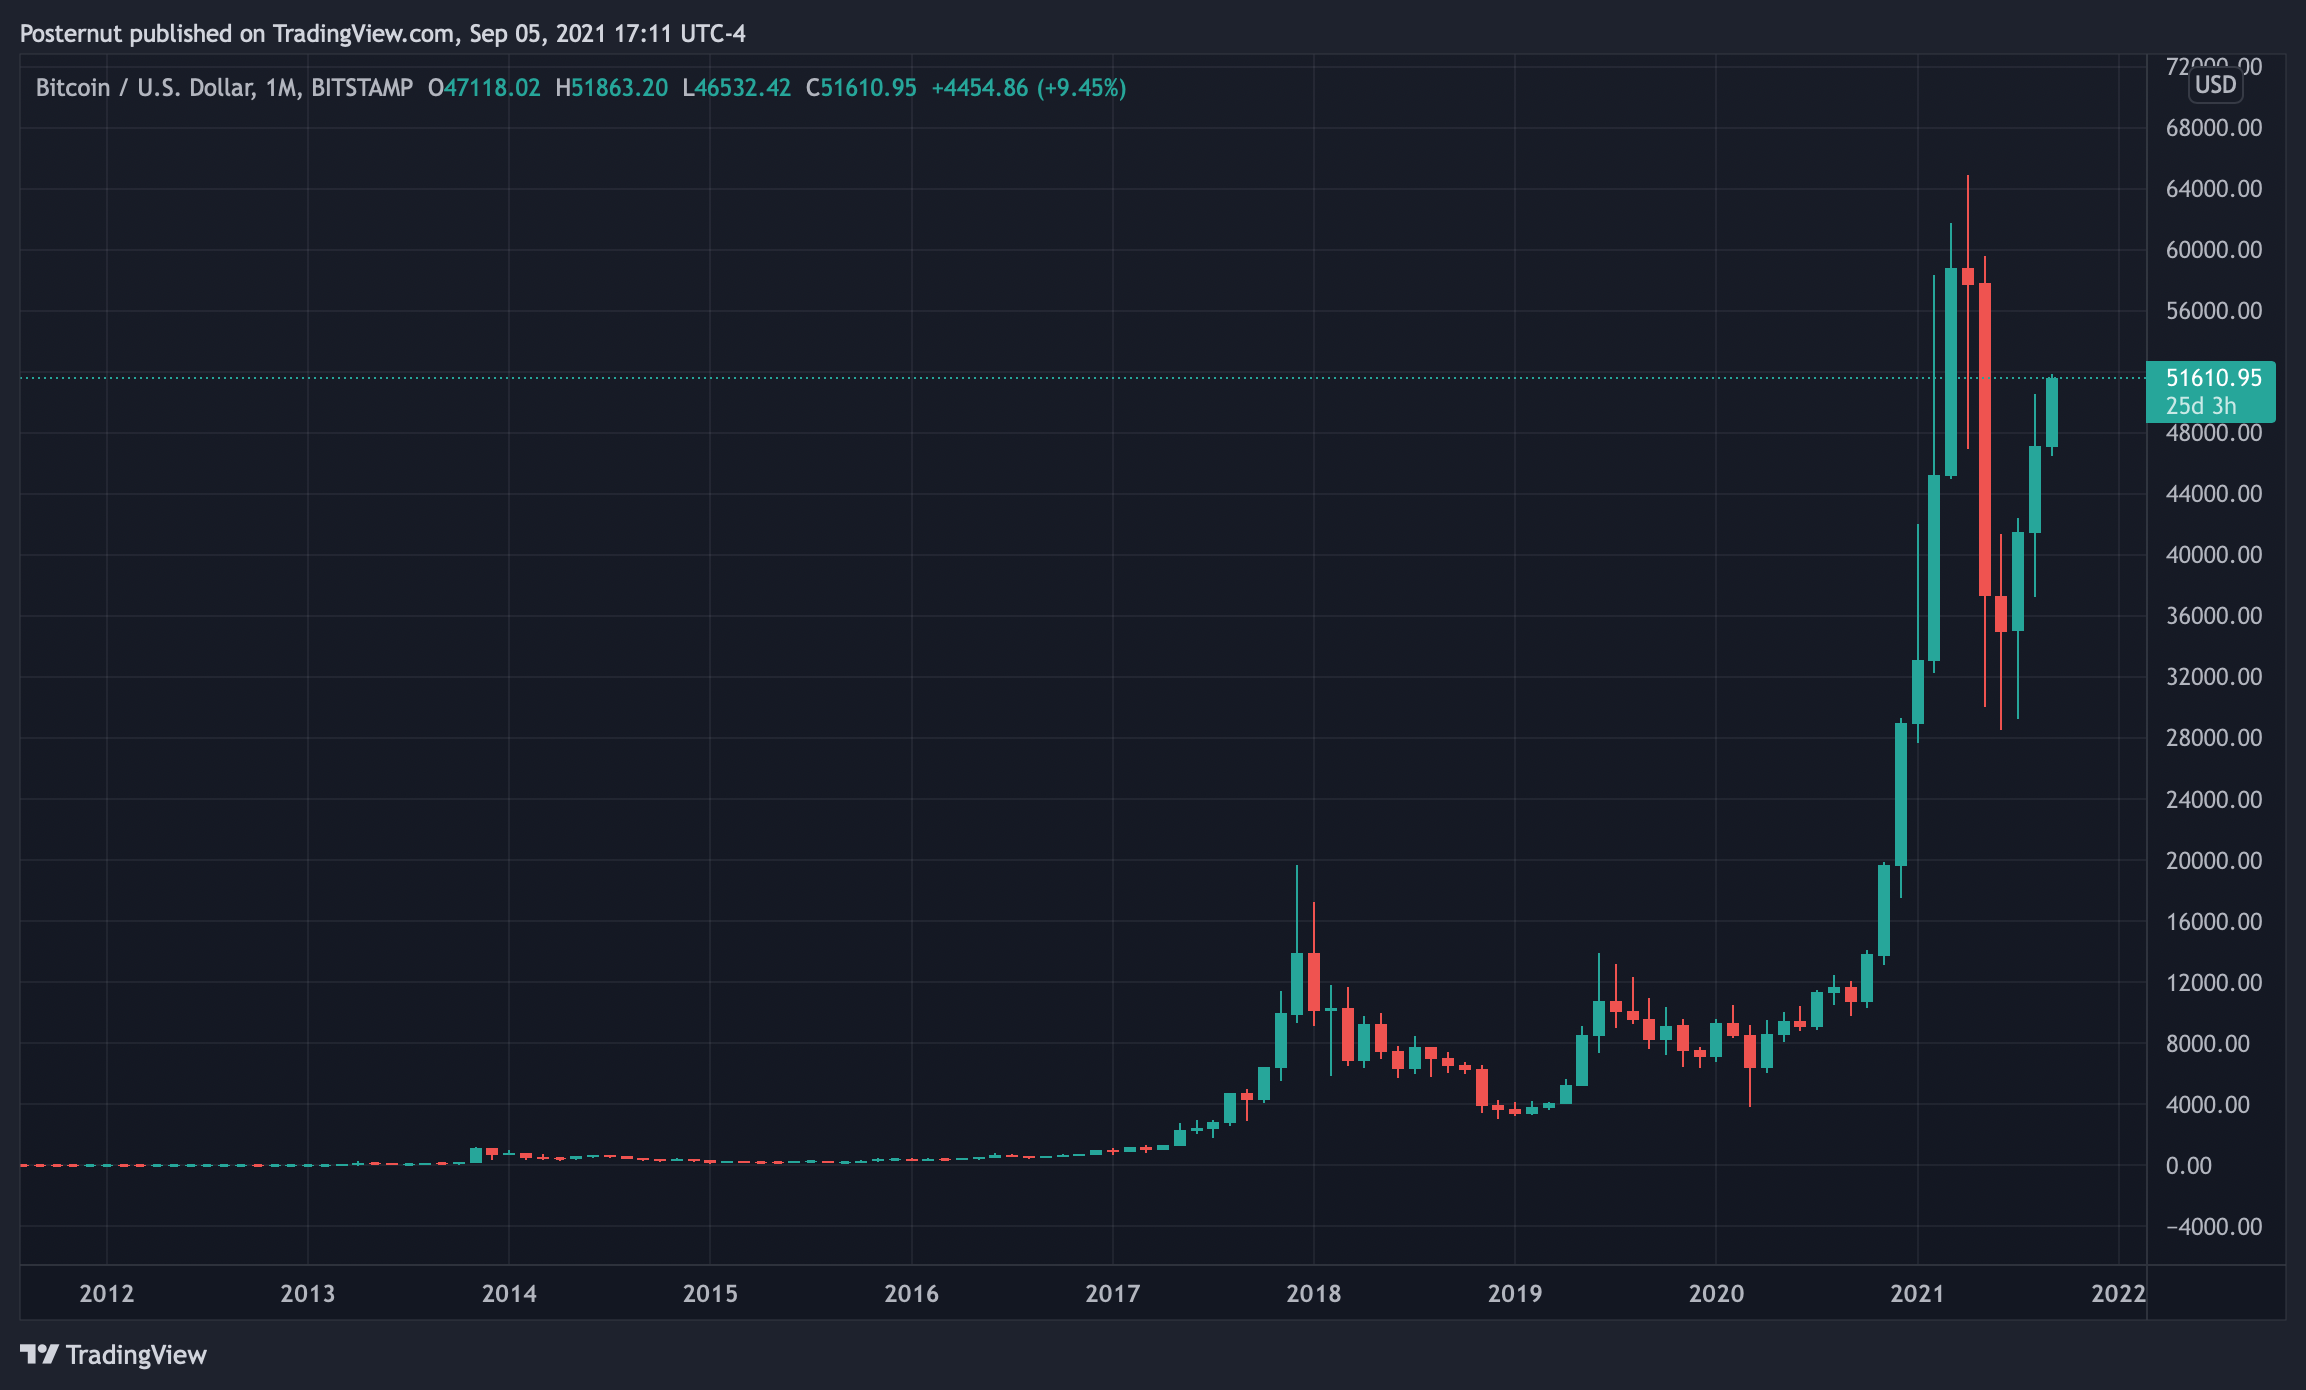 Can Bitcoin Break Historical September Price Trends? Spike Above $51K Suggests 2021's 9th Month Is Different